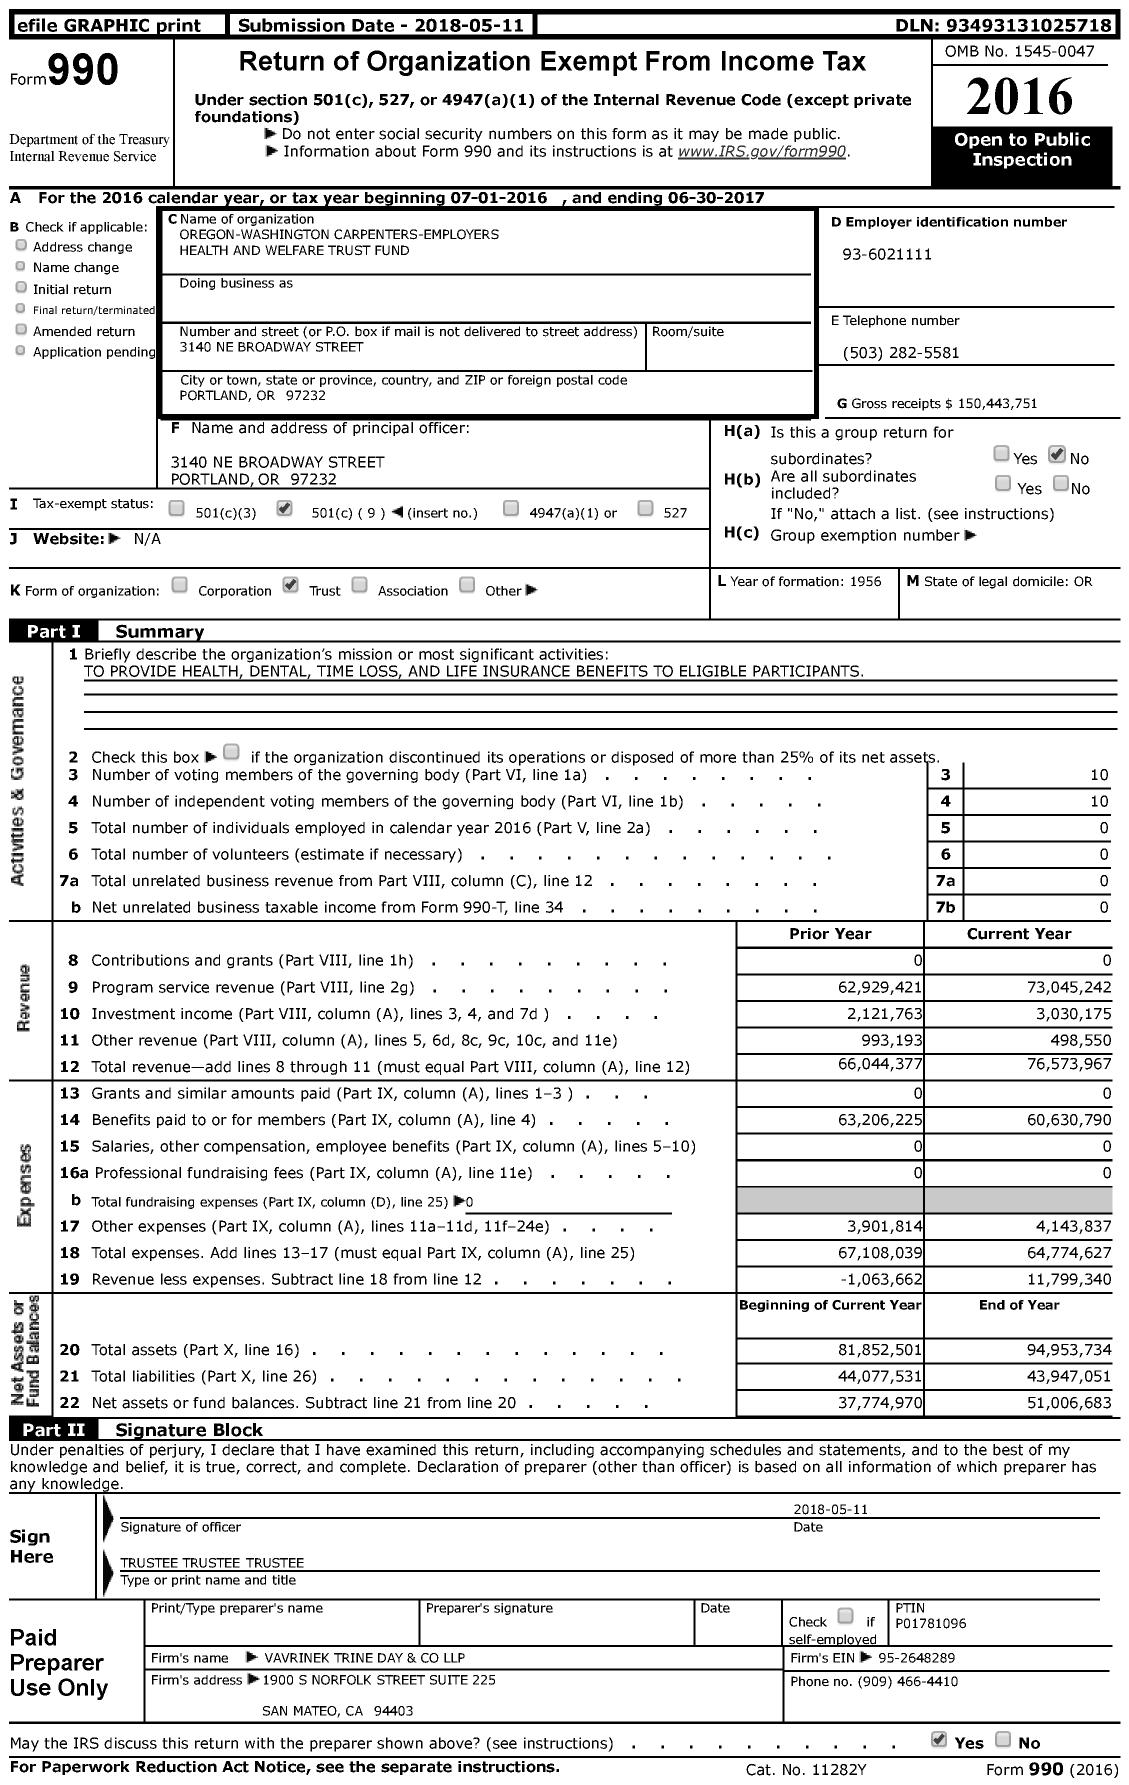 Image of first page of 2016 Form 990 for Oregon-Washington Carpenters-Employers Health and Welfare Trust Fund